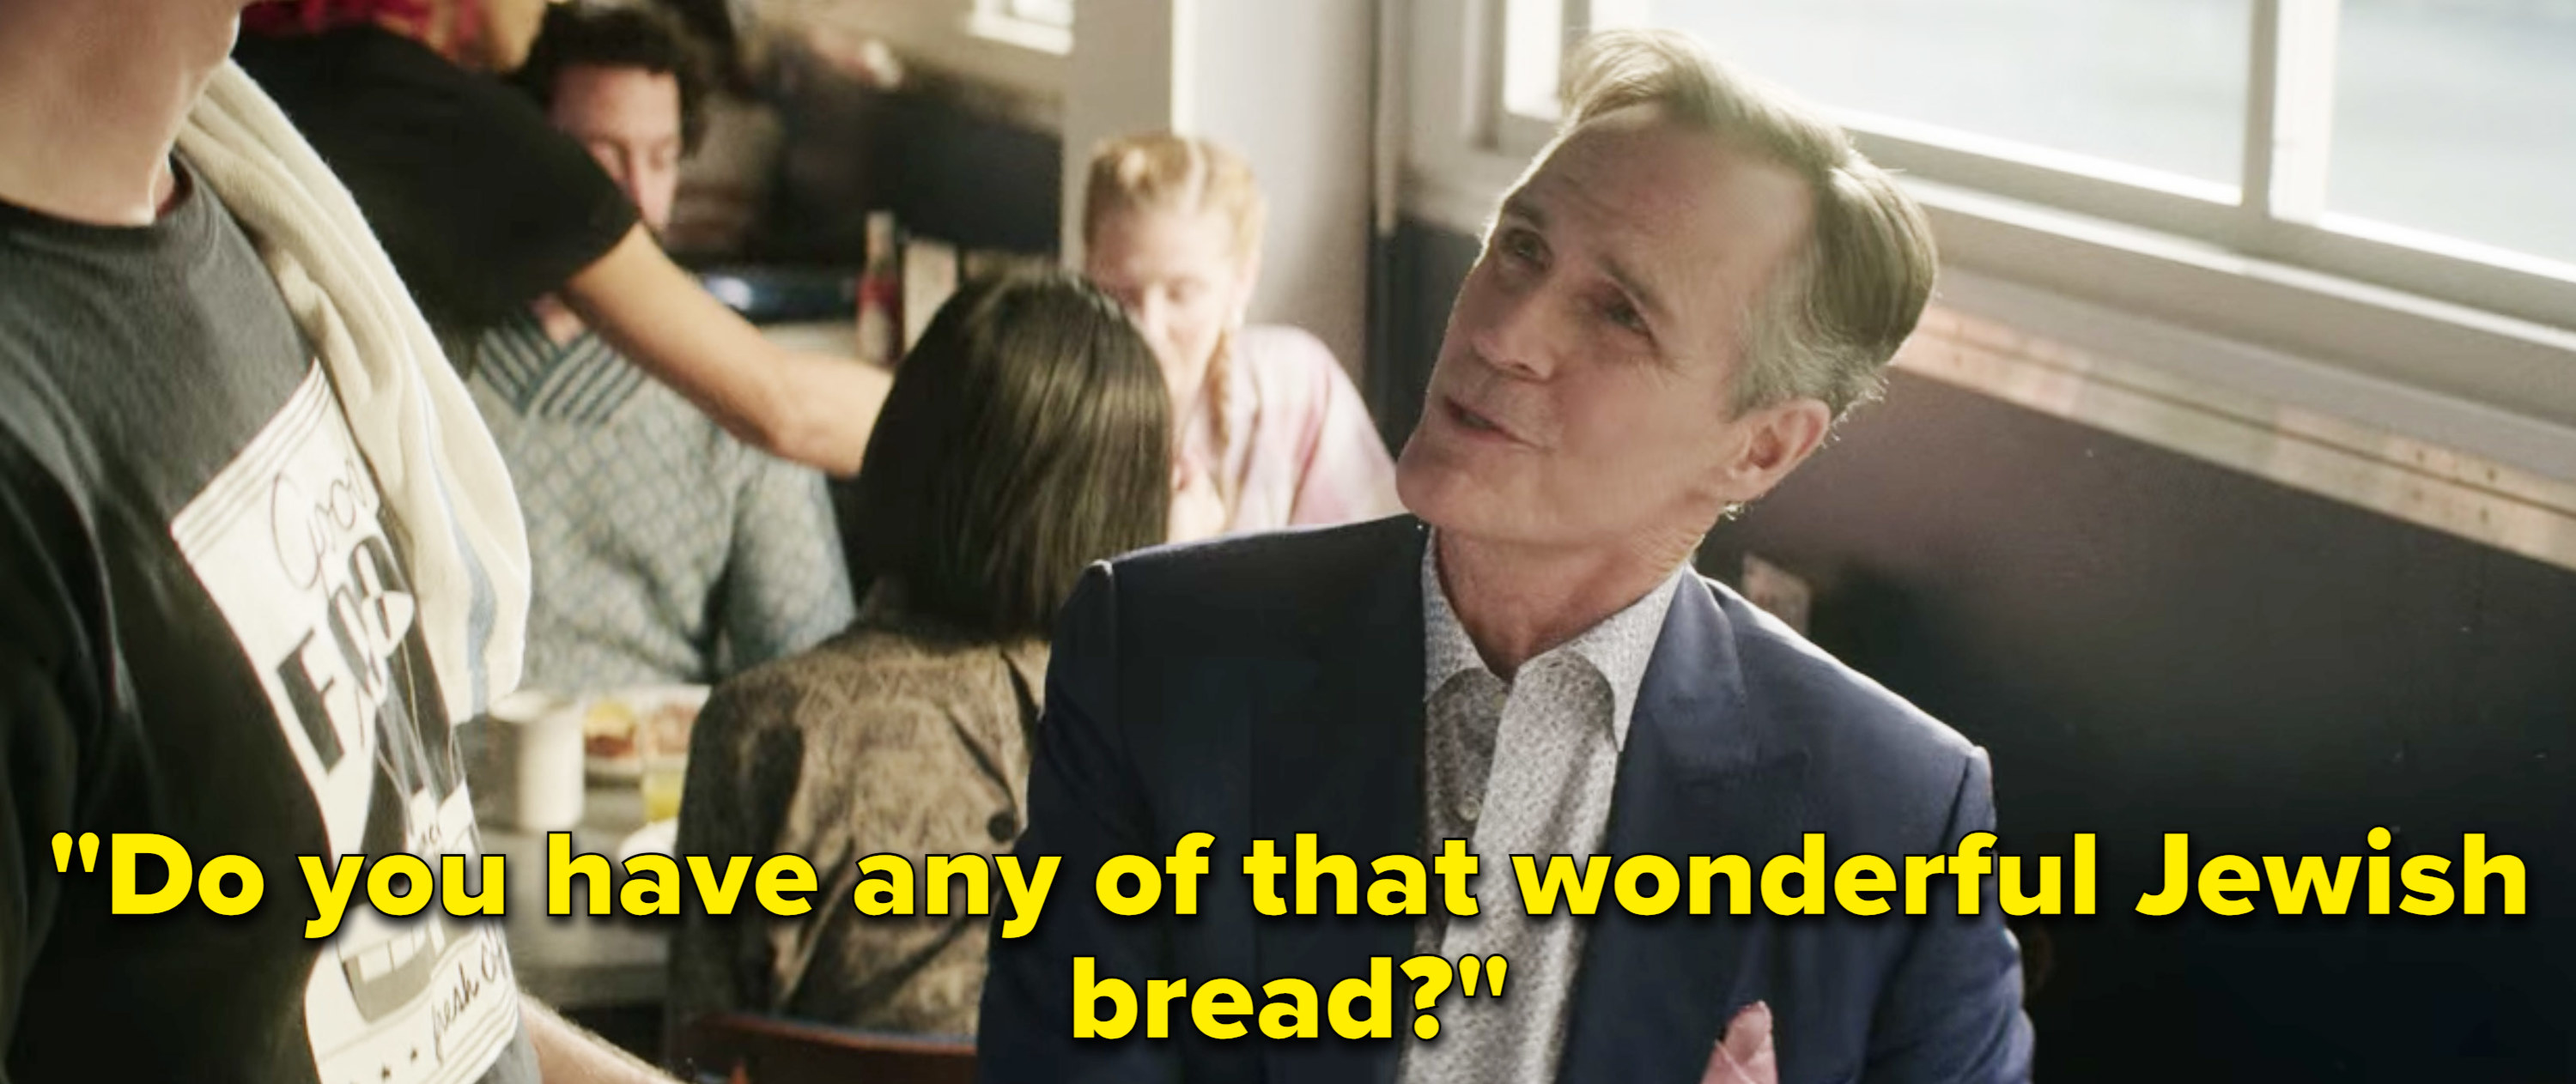 Howard asking in the diner &quot;Do you have any of that wonderful Jewish bread?&quot;